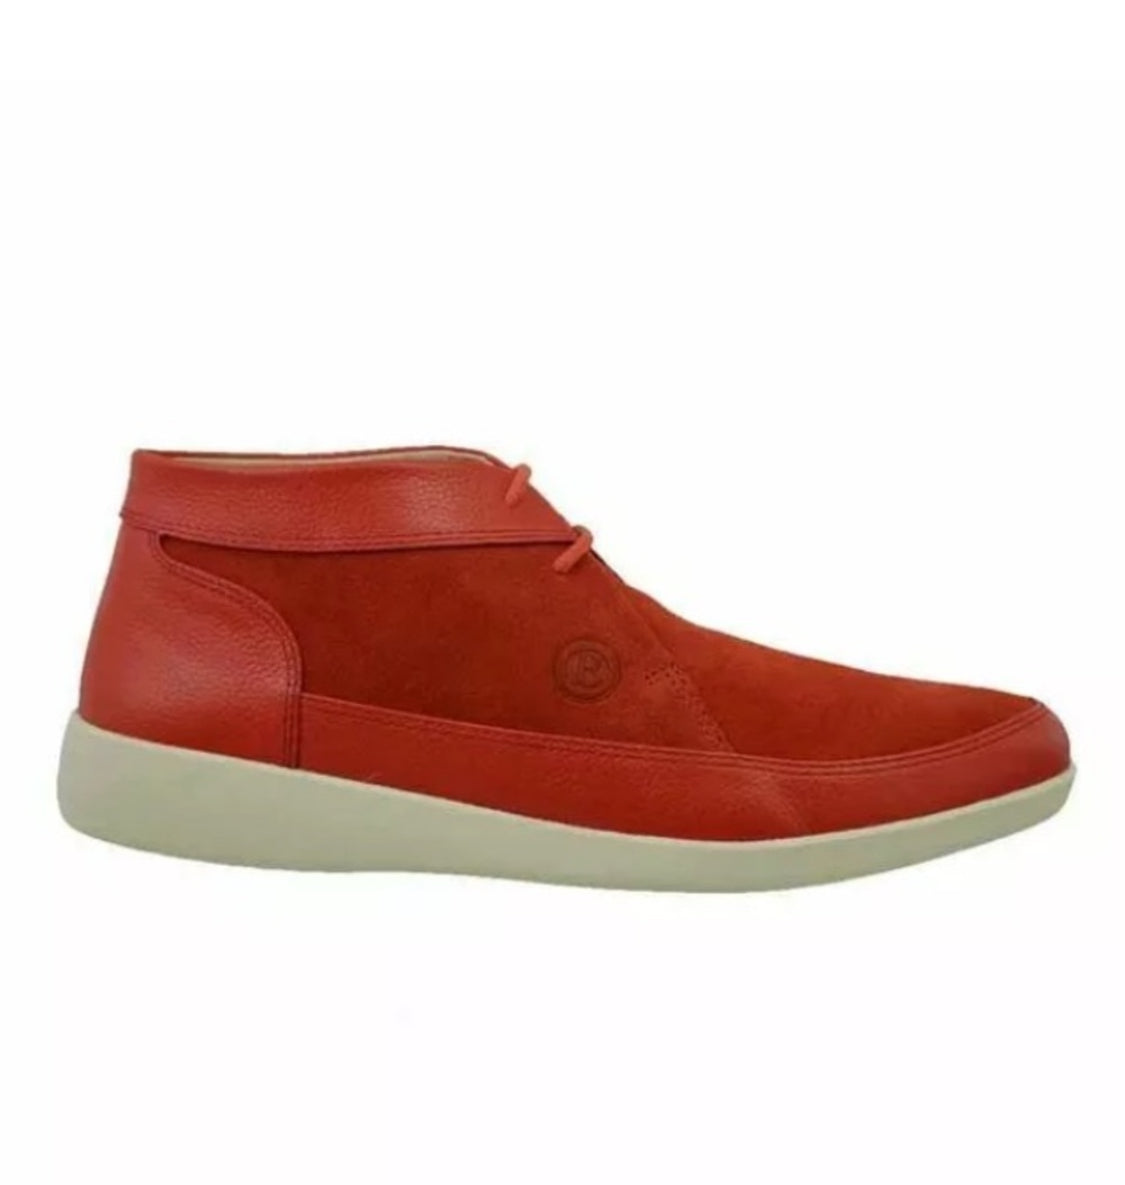  Fashionable and Trendy Men's Red High Top Sneakers by Johnny Famous